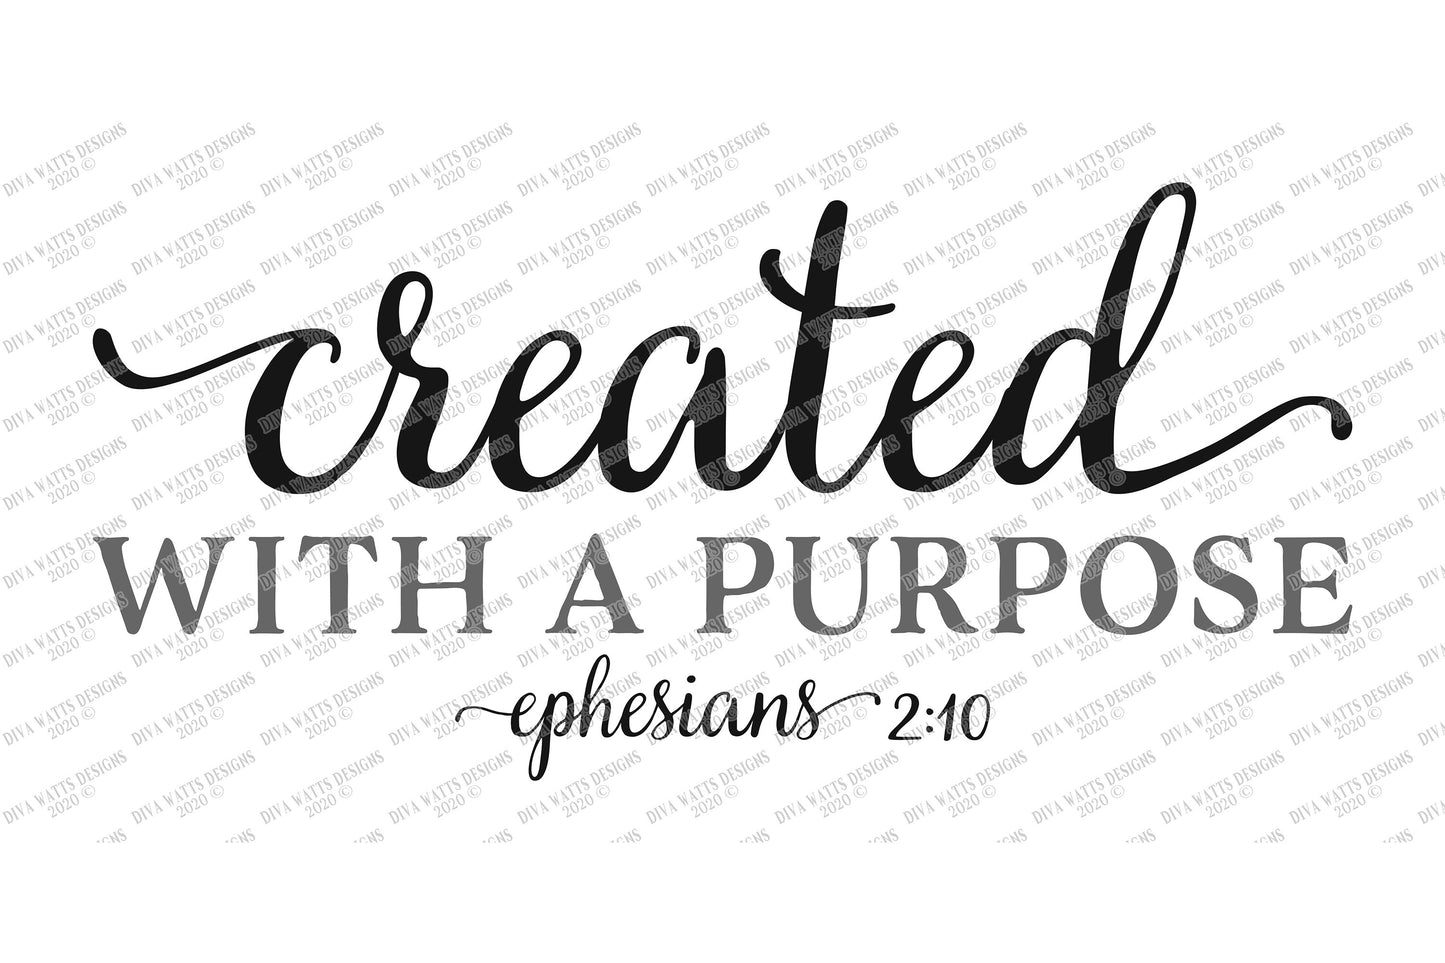 SVG | Created With A Purpose | Cutting File | Christian Scripture Verse | Ephesians | Vinyl Stencil HTV | Farmhouse Rustic Sign | dxf eps